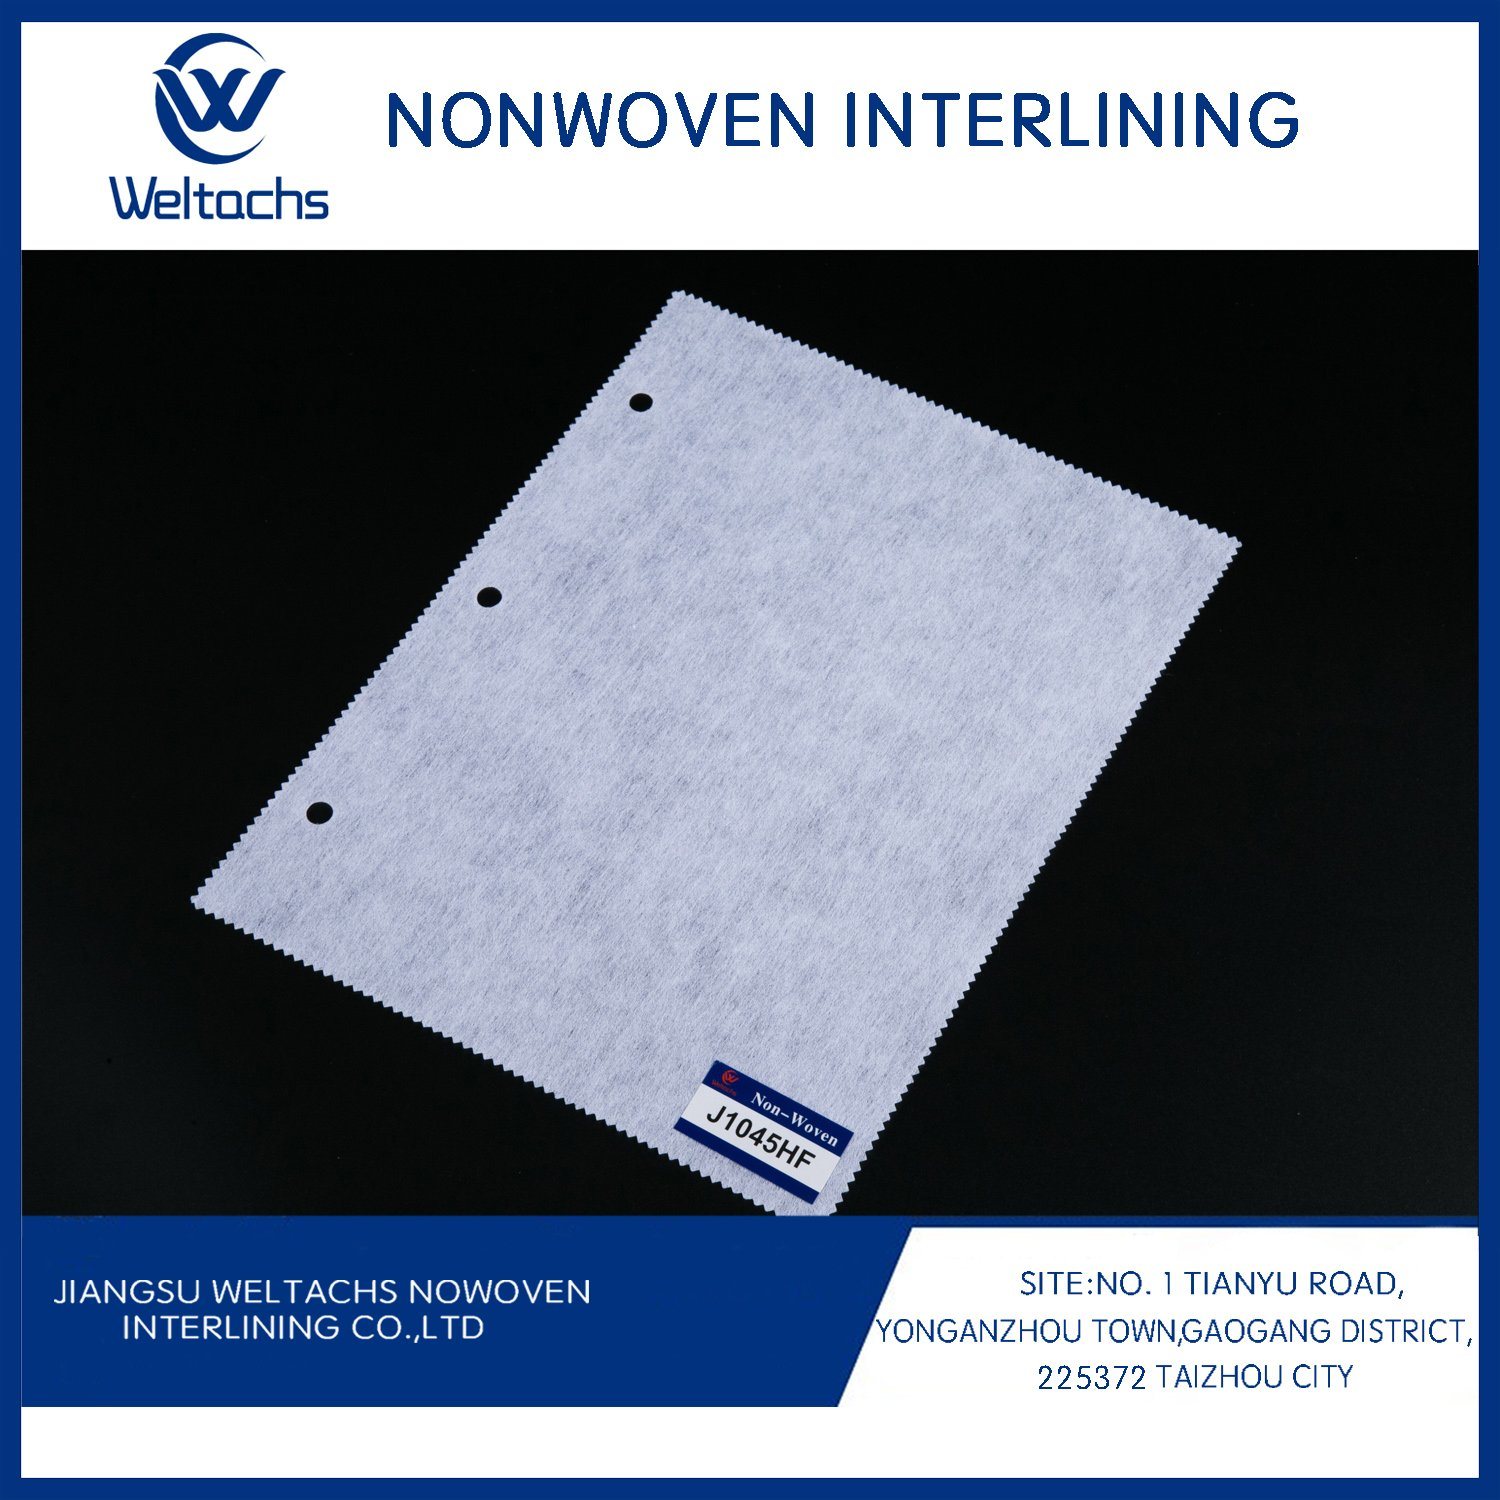 Non Woven Fusing Interlining Gum Stay Chemical Bond Garment Fusible Interlining Hf Quality